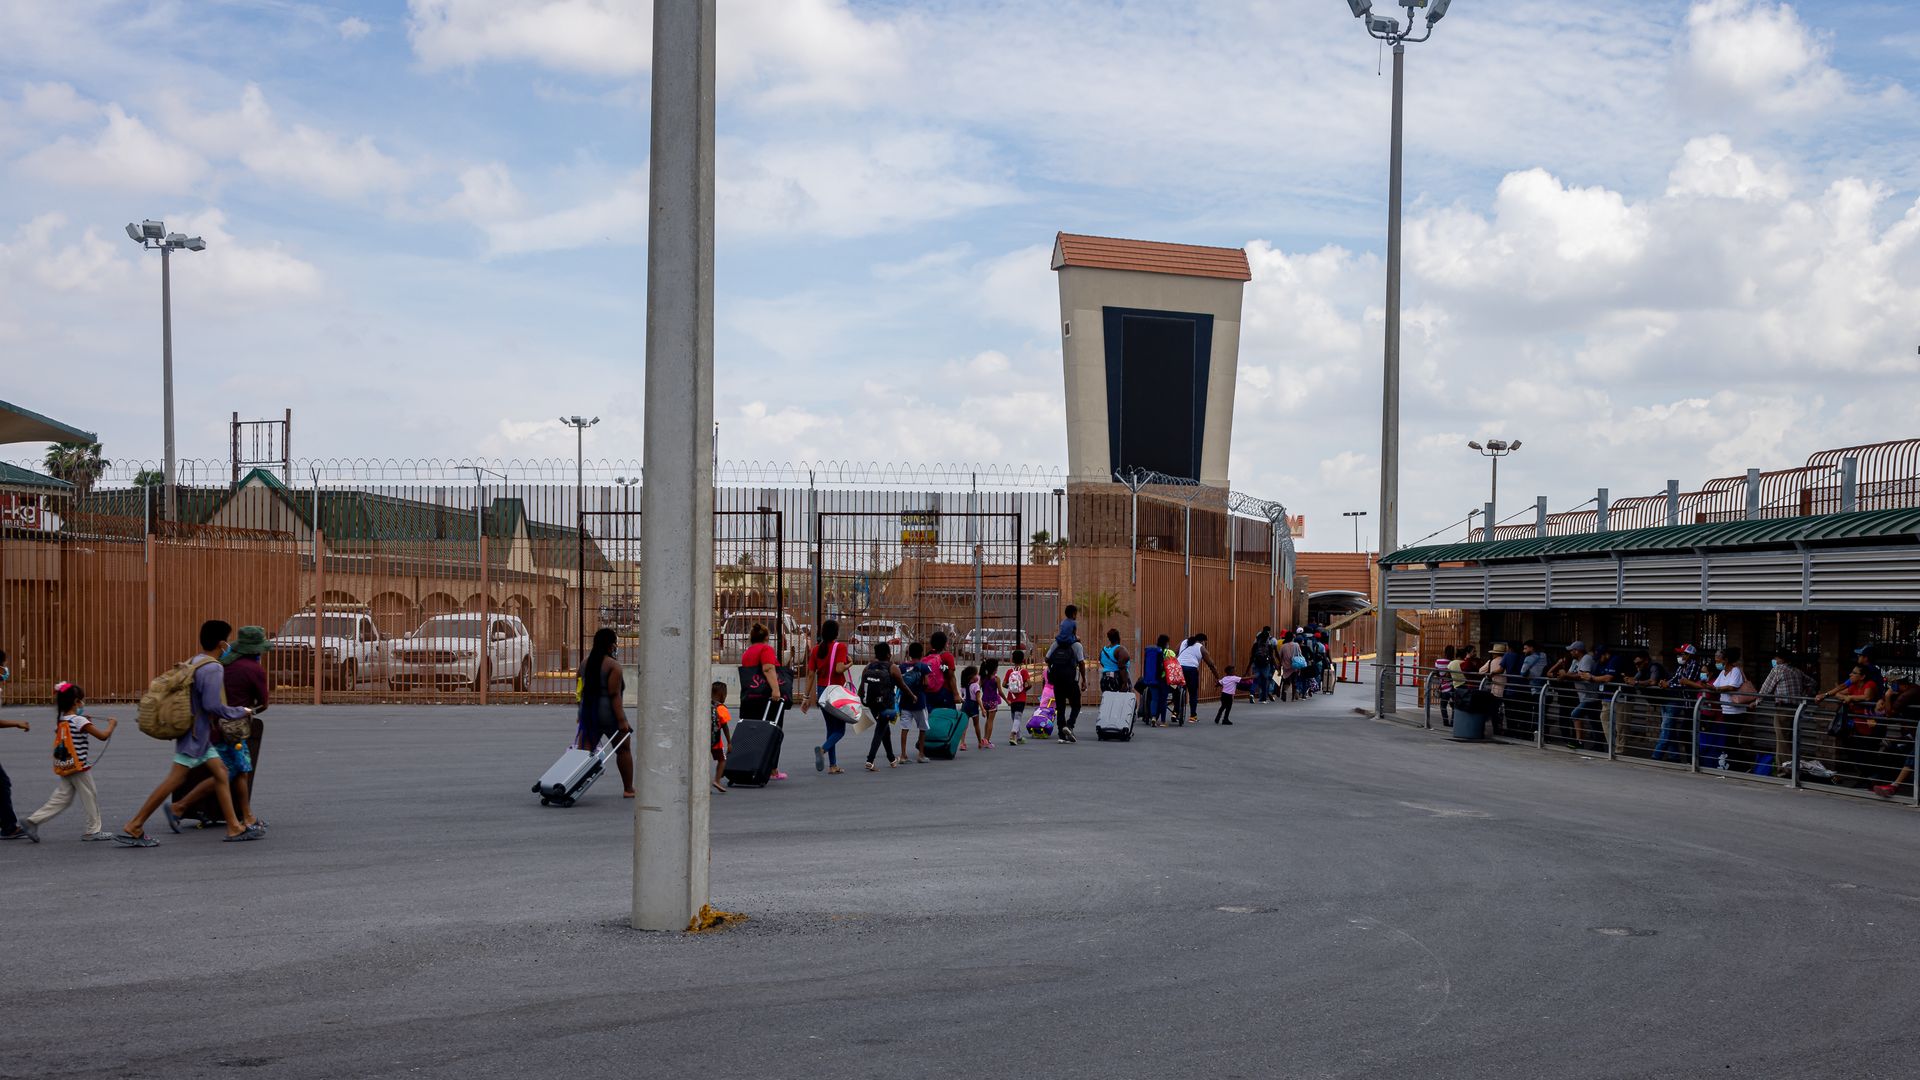 Asylum seekers are escorted into the U.S. from Mexico.